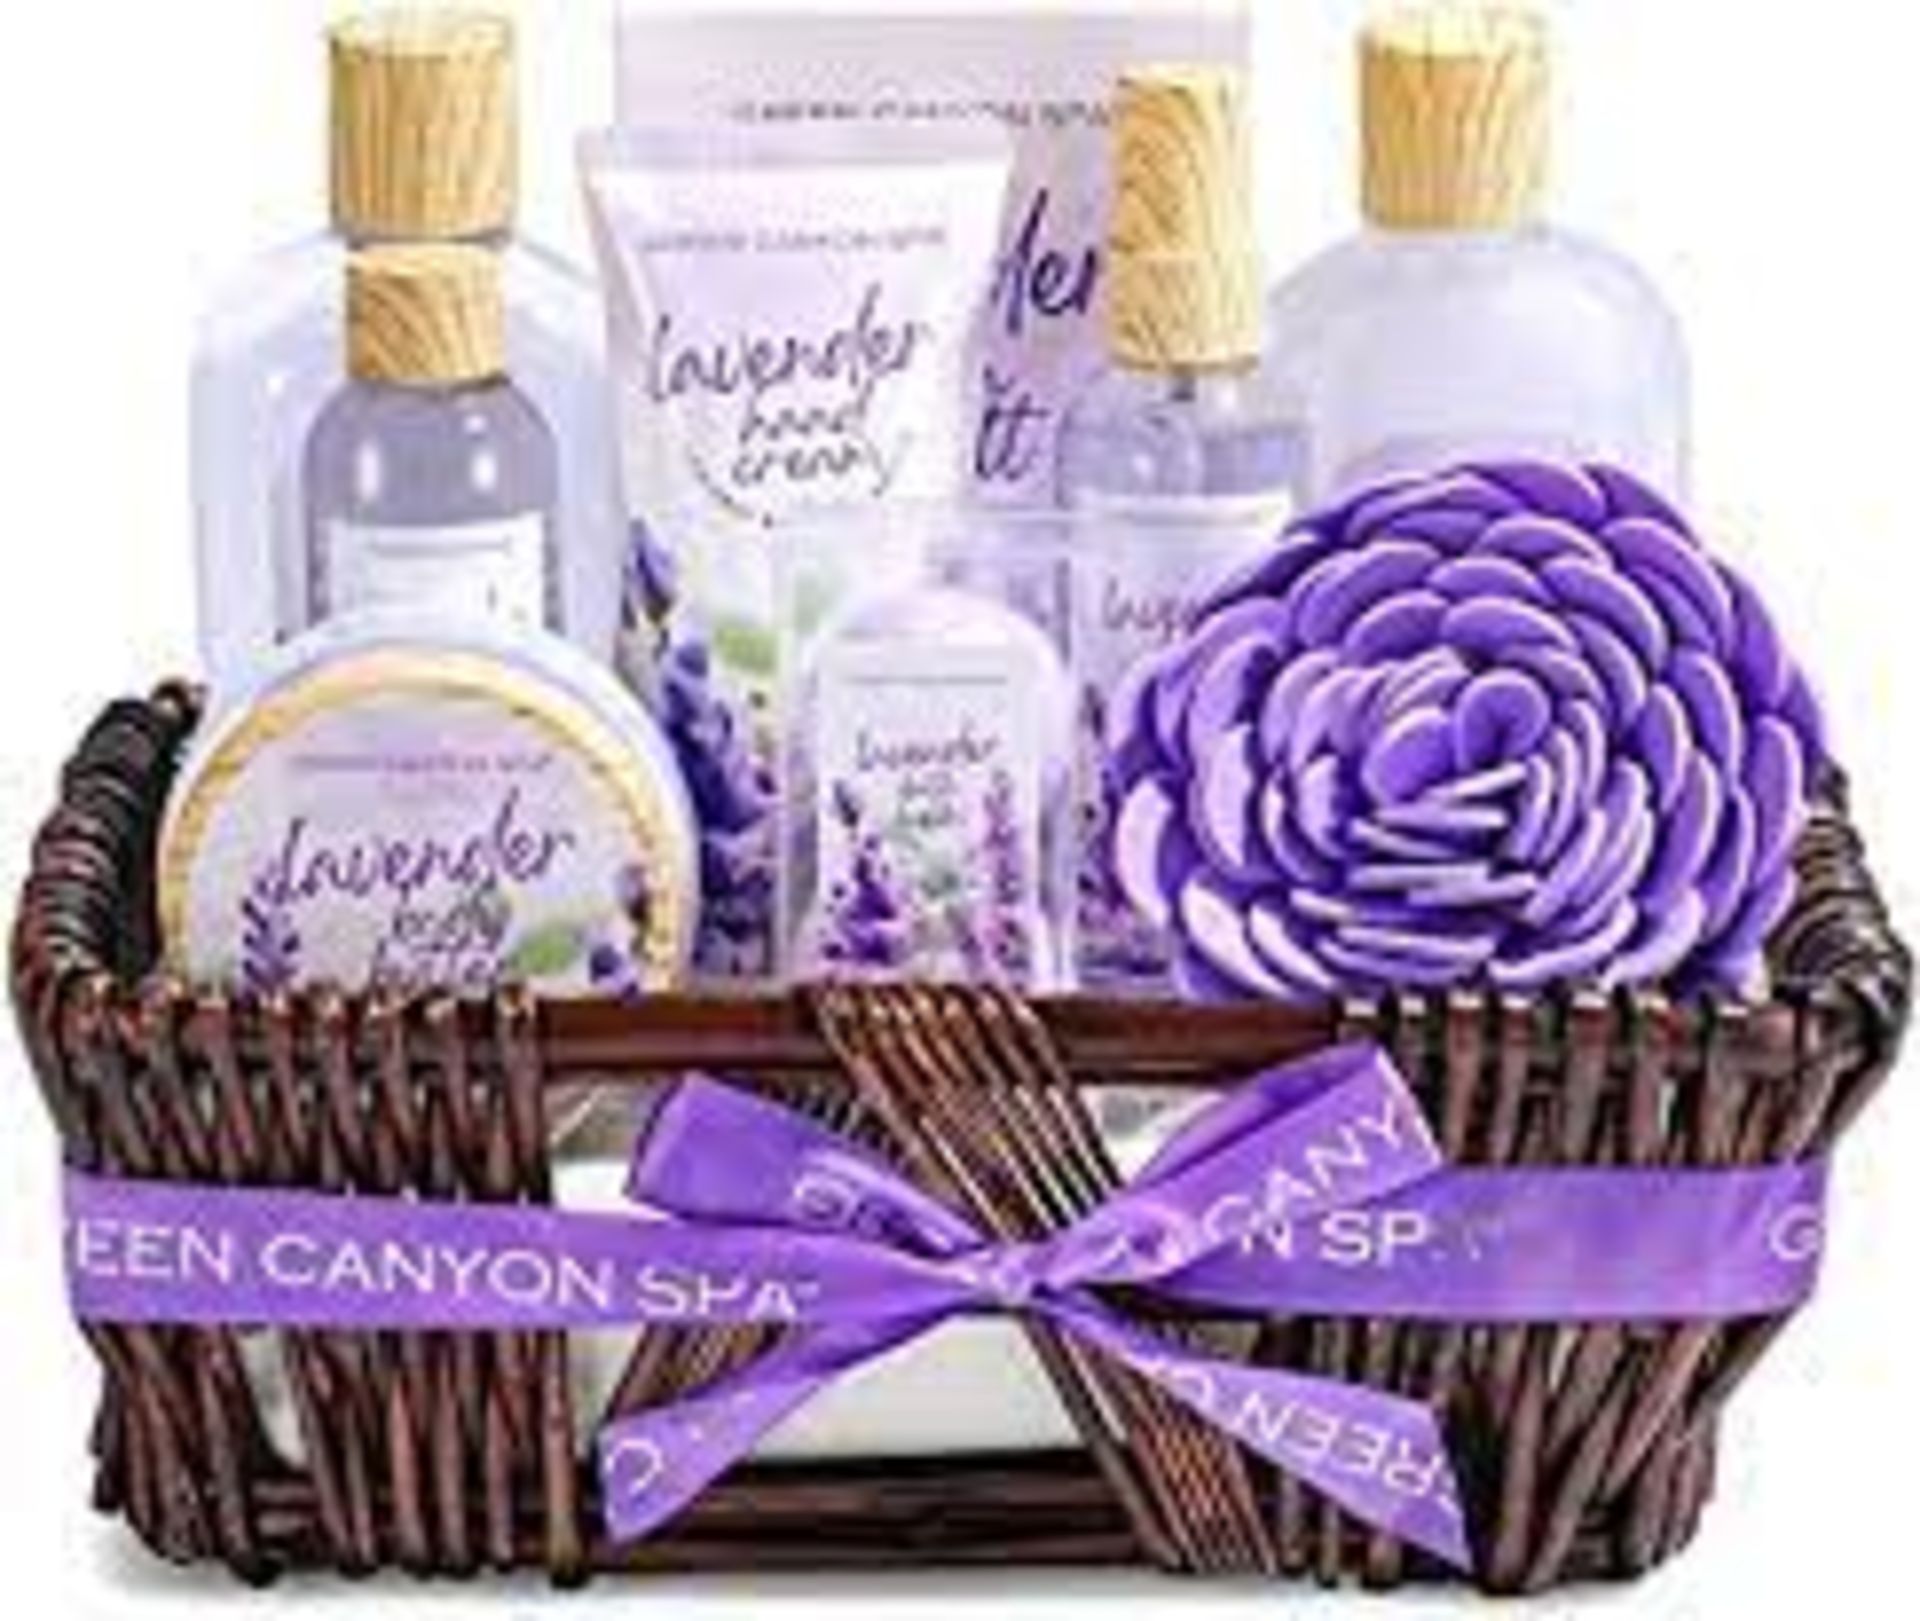 PALLET TO CONTAIN 60 X NEW PACKAGED GREEN CANYON SPA Spa Gift Baskets for Women (GCS-BP-019-1)-12